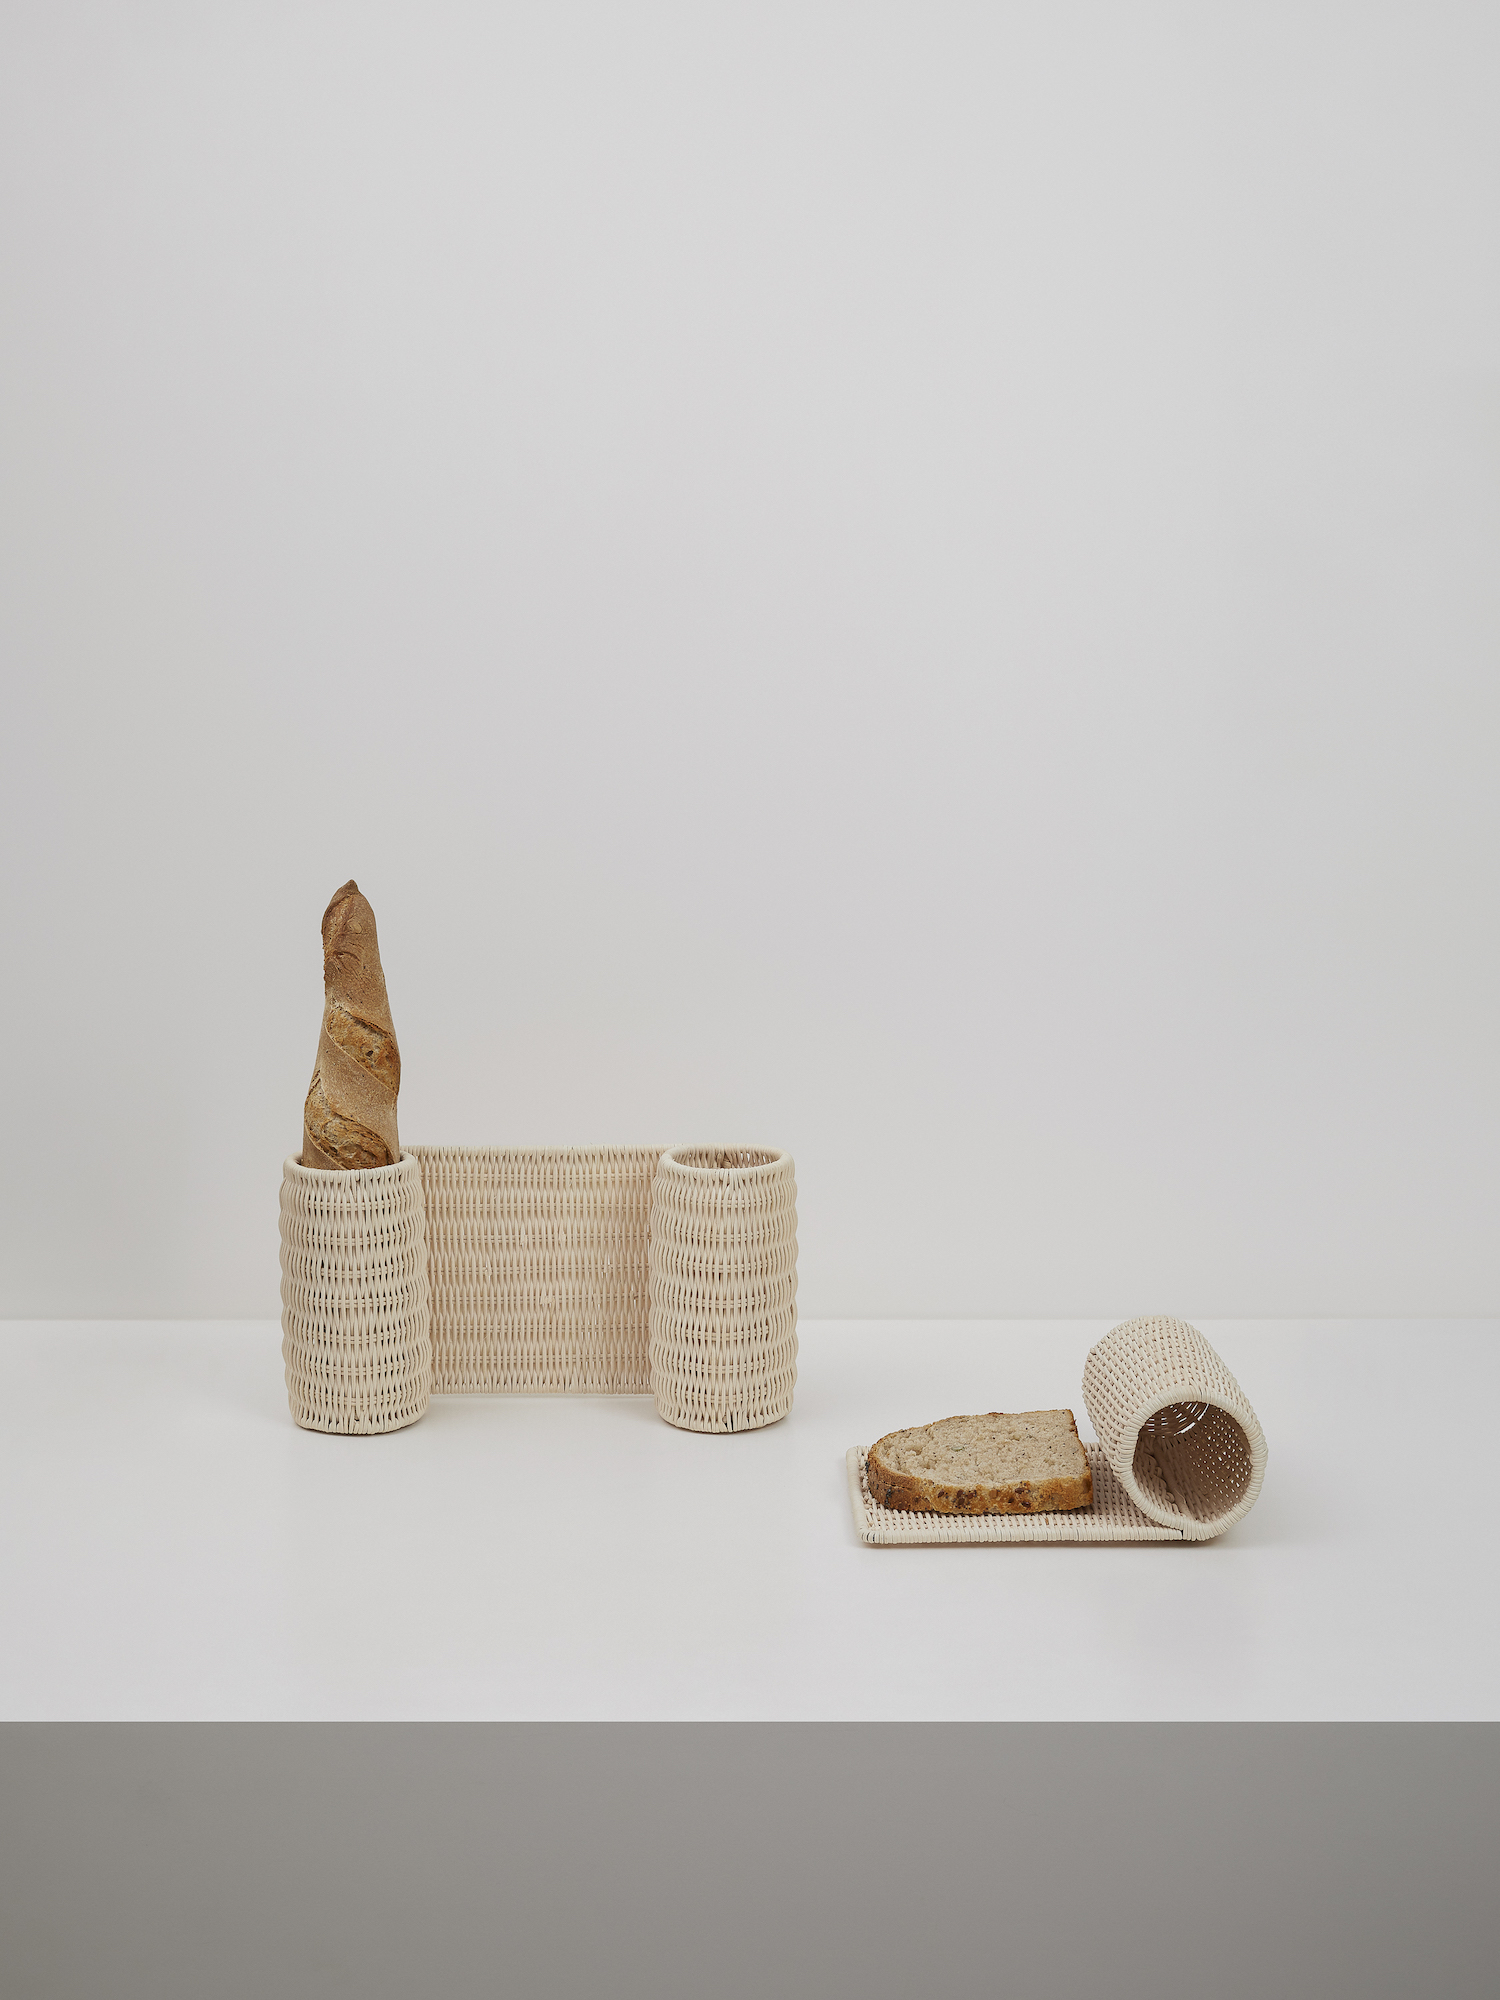 Fire Tools by Thom Fougere for Mjolk brass, oak and natural